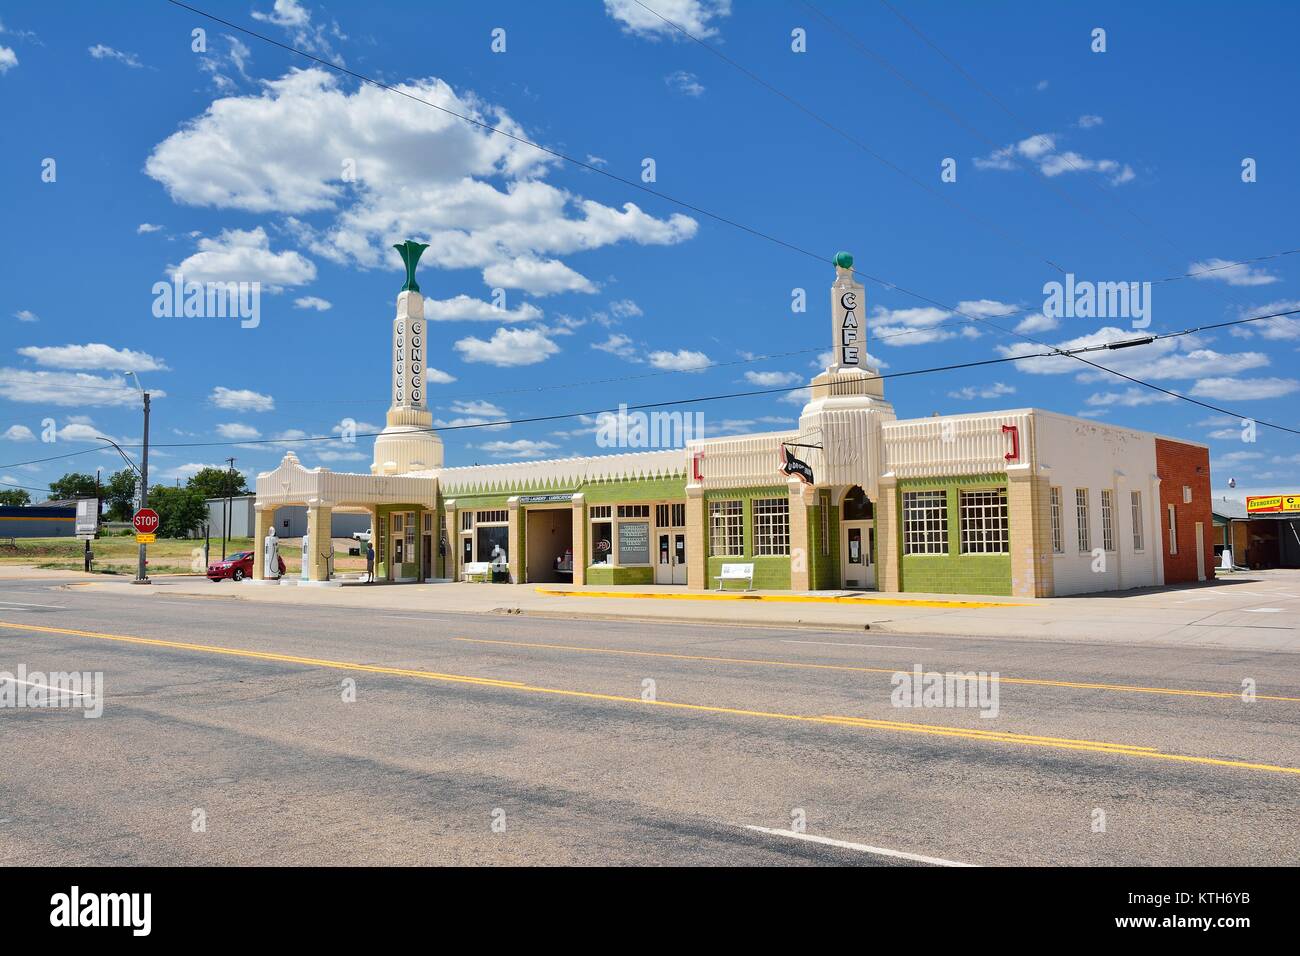 Shamrock, Texas - July 20, 2017: Art deco U-Drop Inn Conoco Station (Tower Station) on Route 66. Appeared in the animated movie 'Cars'. National regis Stock Photo